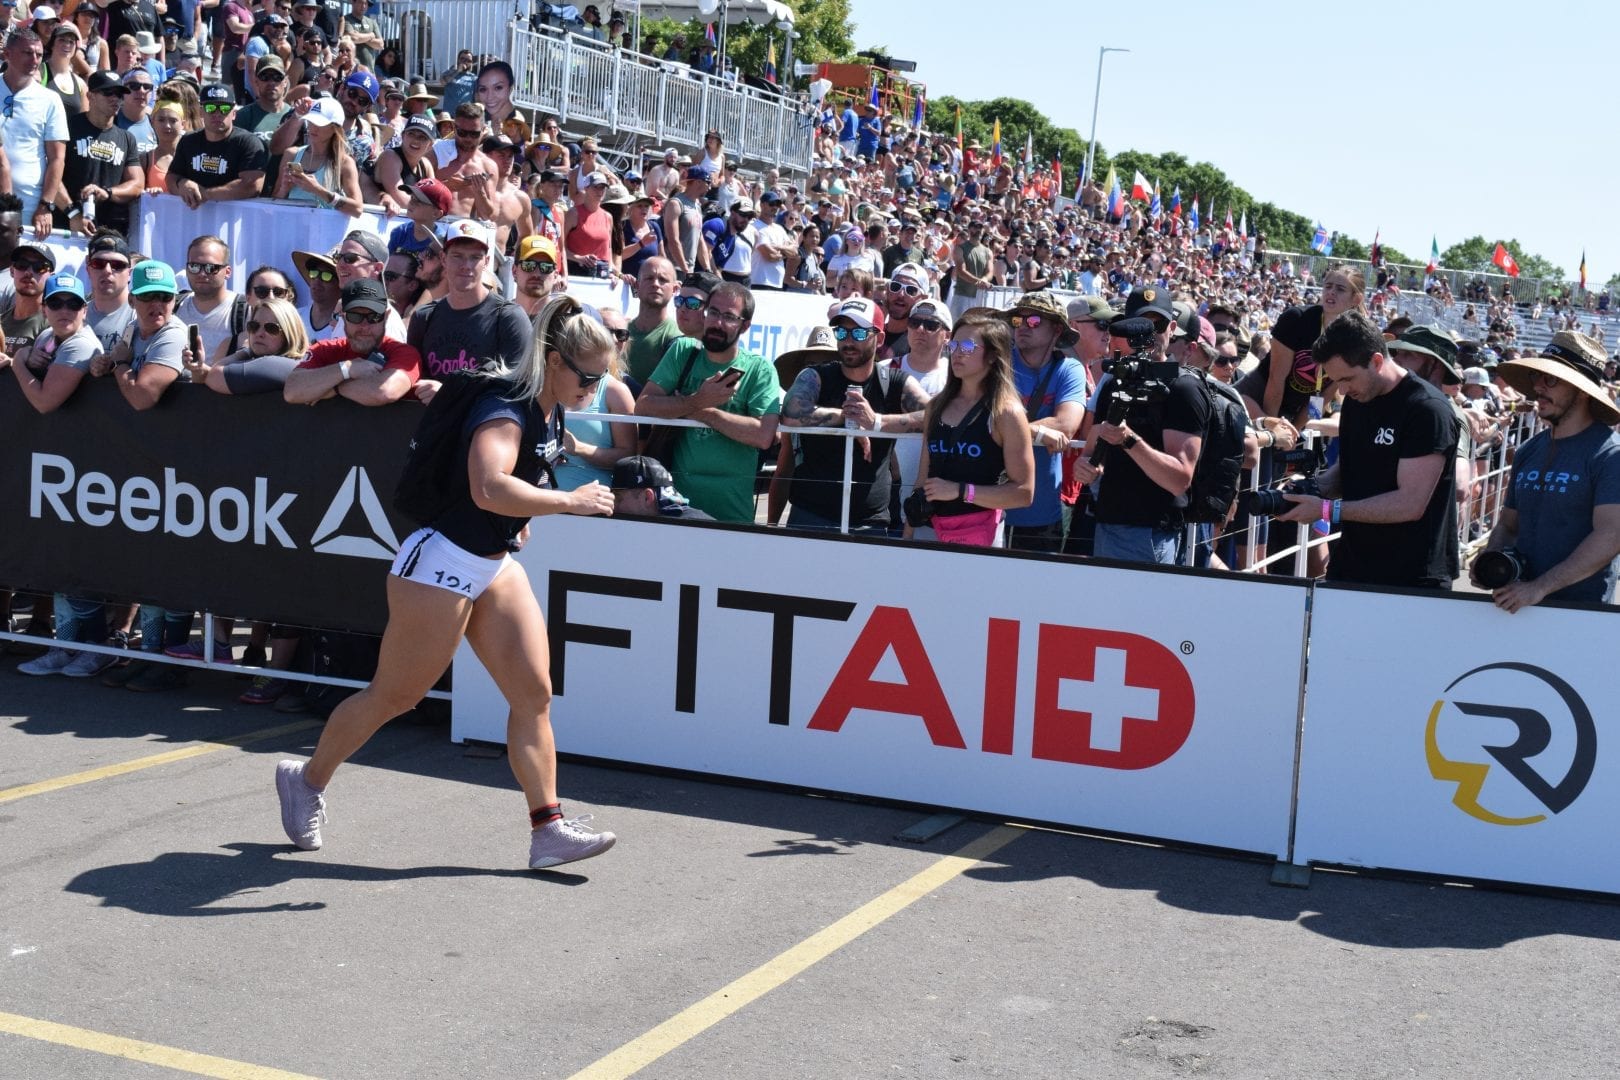 Dani Speegle completes the Ruck Run event at the 2019 CrossFit Games.